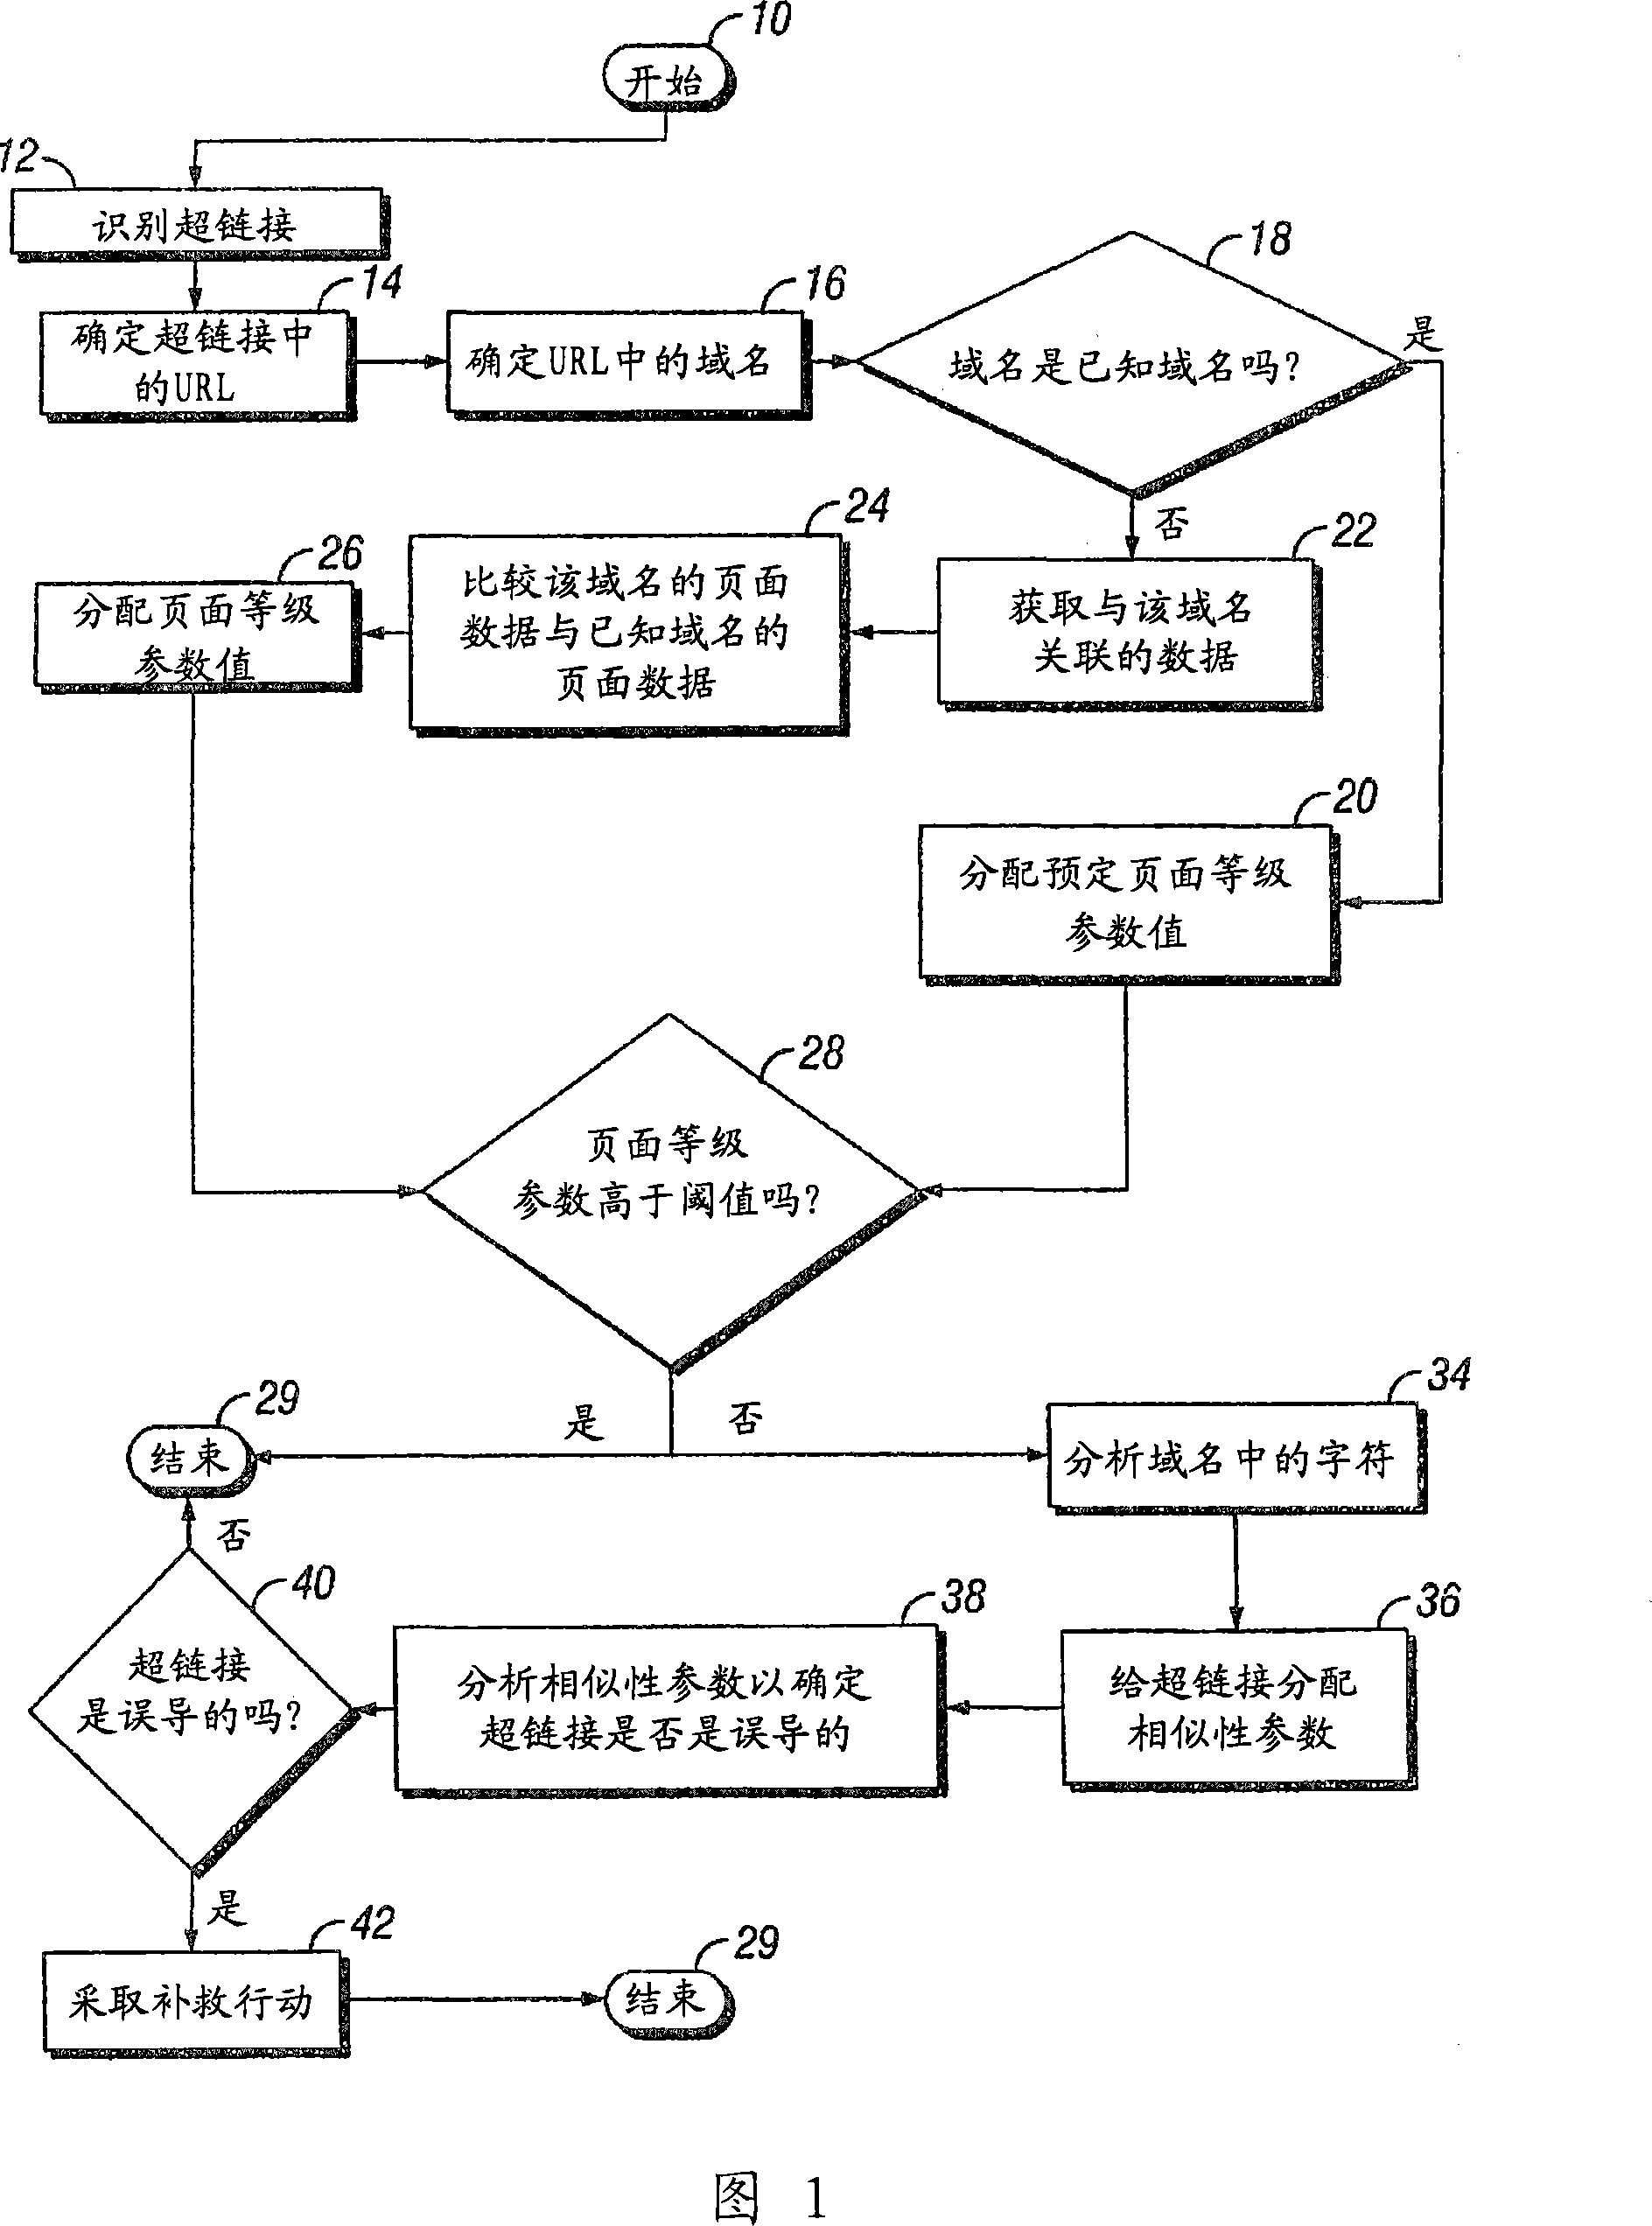 Method and system for detecting and remediating misleading hyperlinks